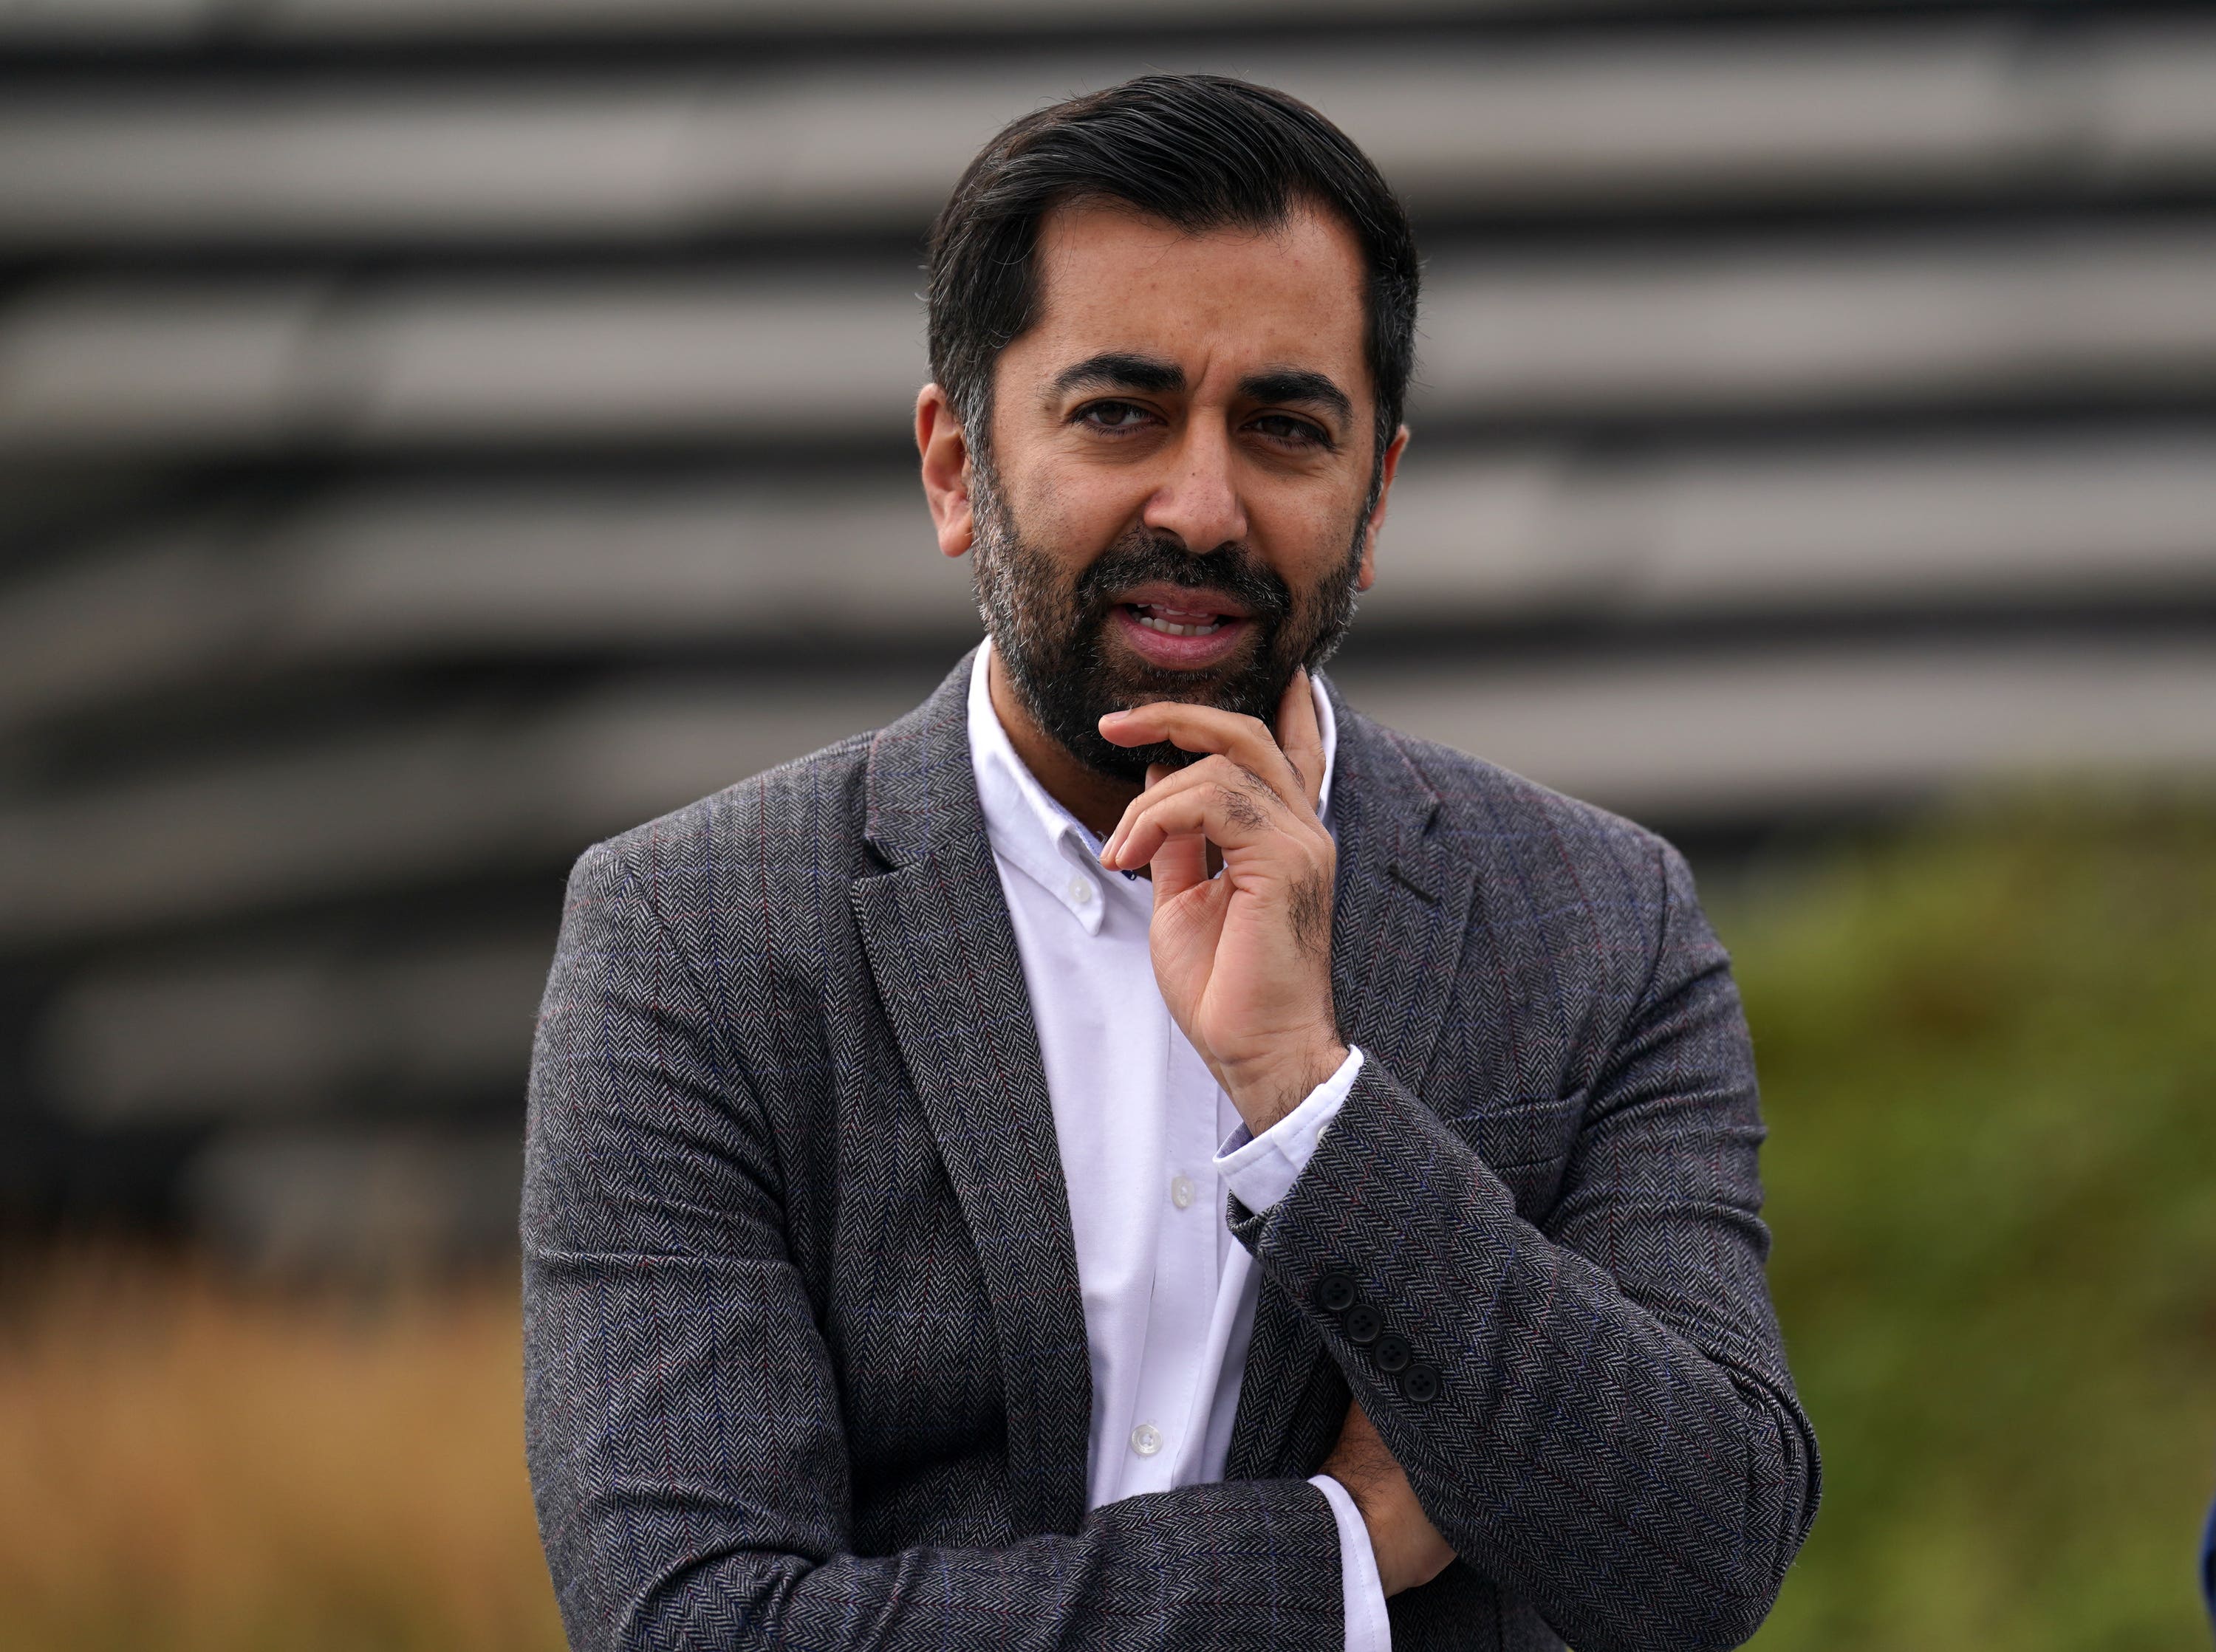 Humza Yousaf said his party must take the result ‘on the chin’.